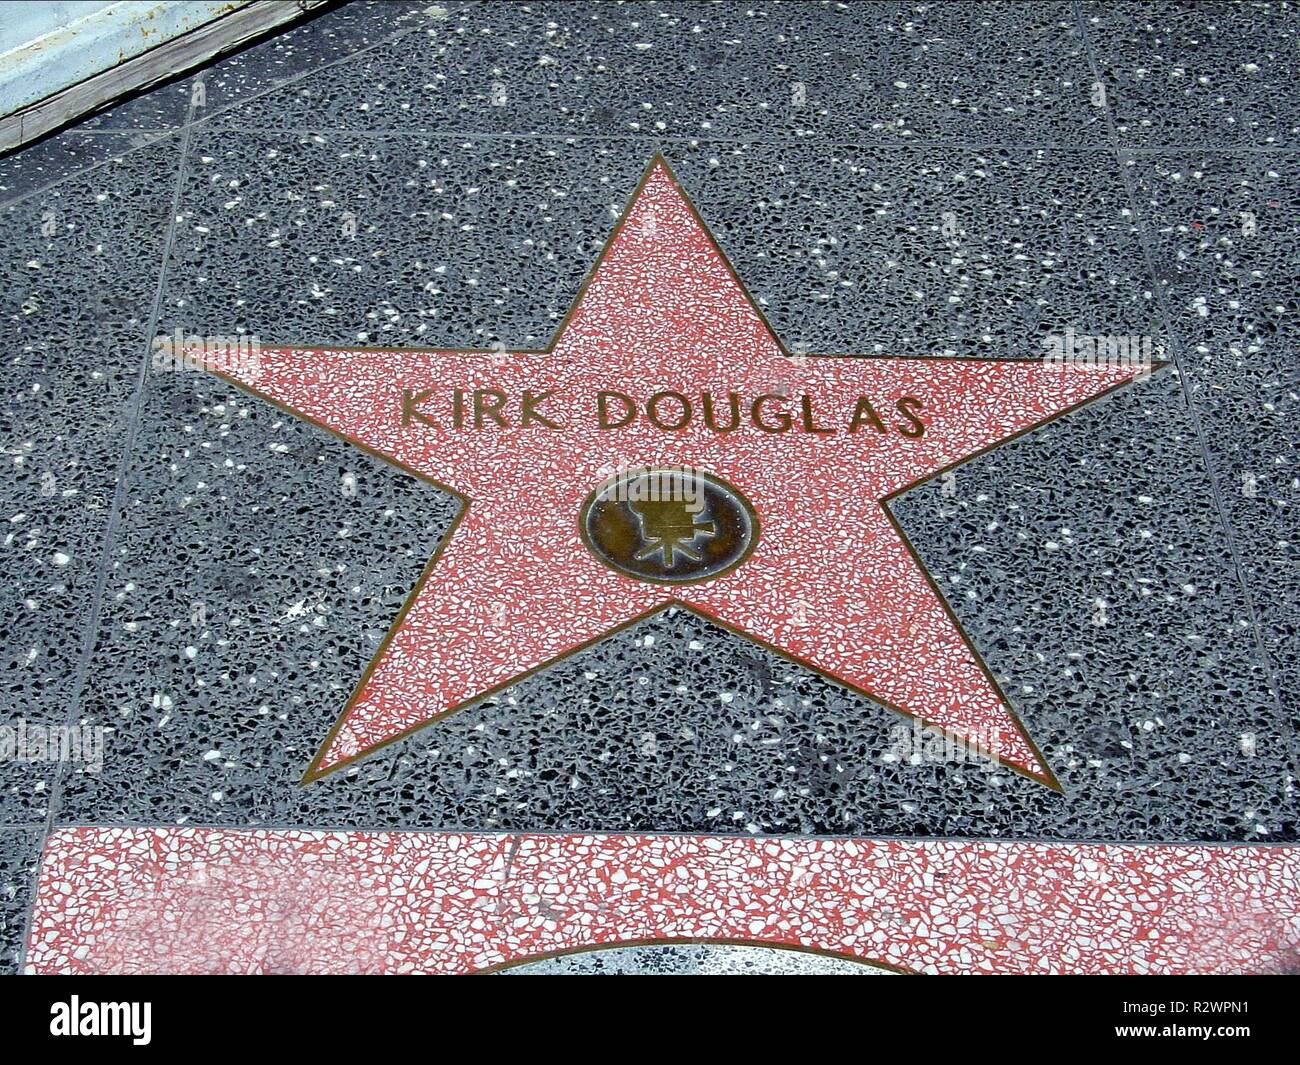 KIRK DOUGLAS  ACTOR      01 June 2005  CTY96960      Stern auf dem Hollywood Walk of Fame / star on the Hollywood Walk Of Fame Stock Photo